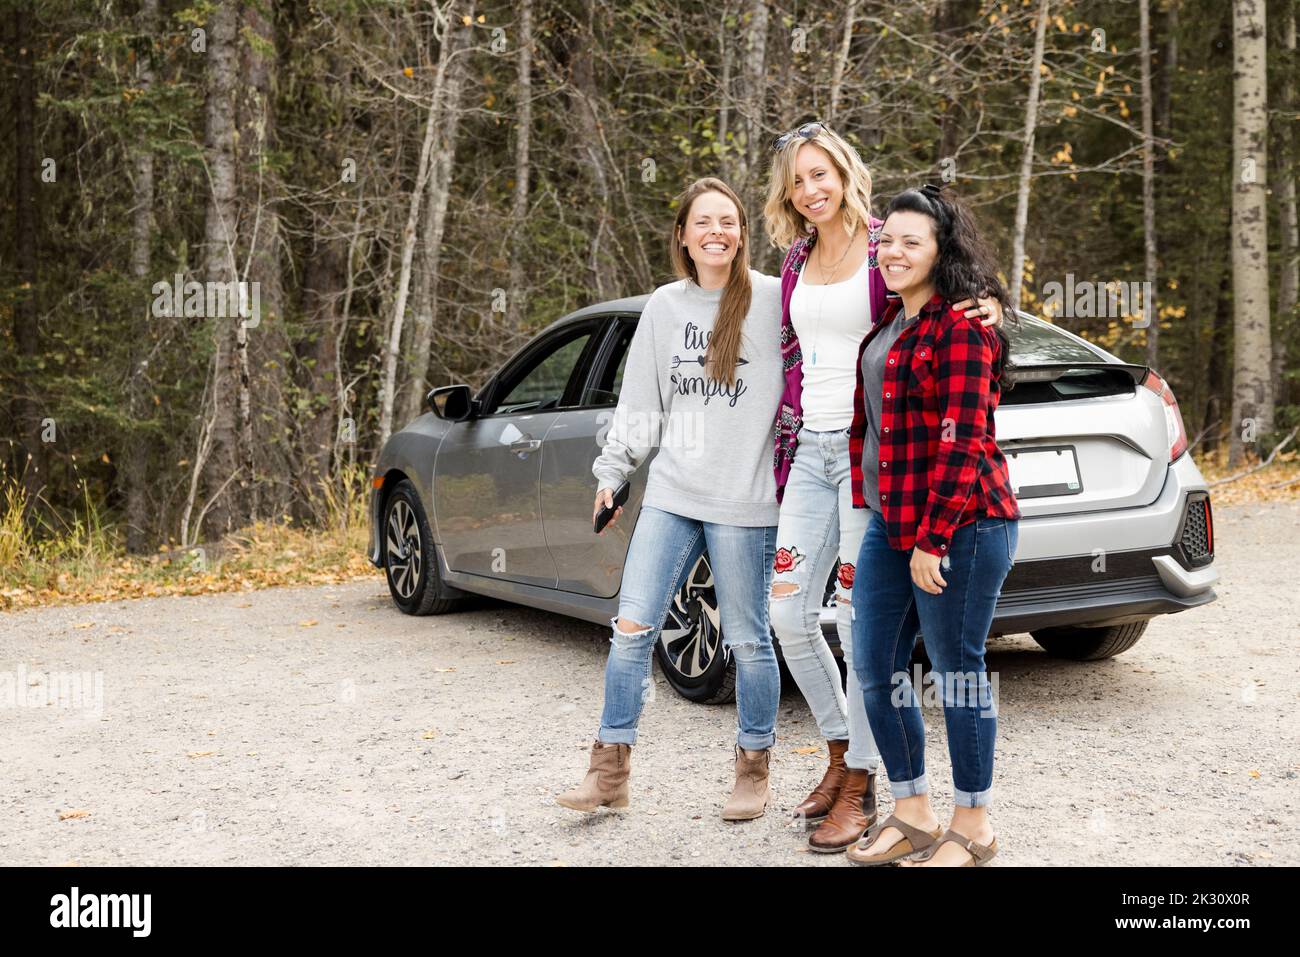 Women walking away from car in forest Stock Photo